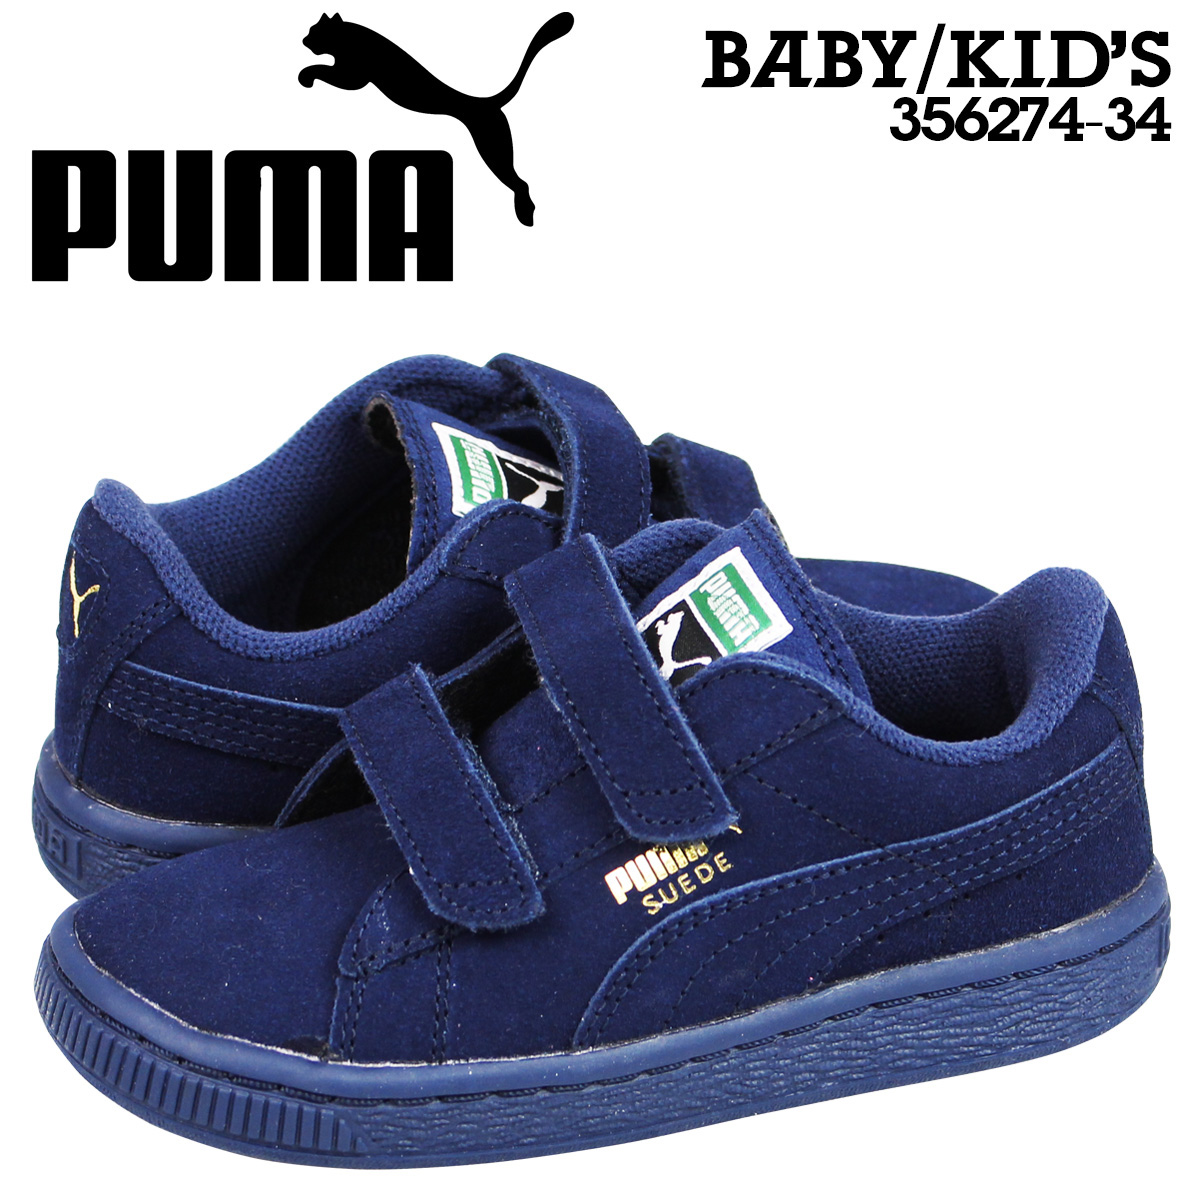 puma shoes online shopping offers